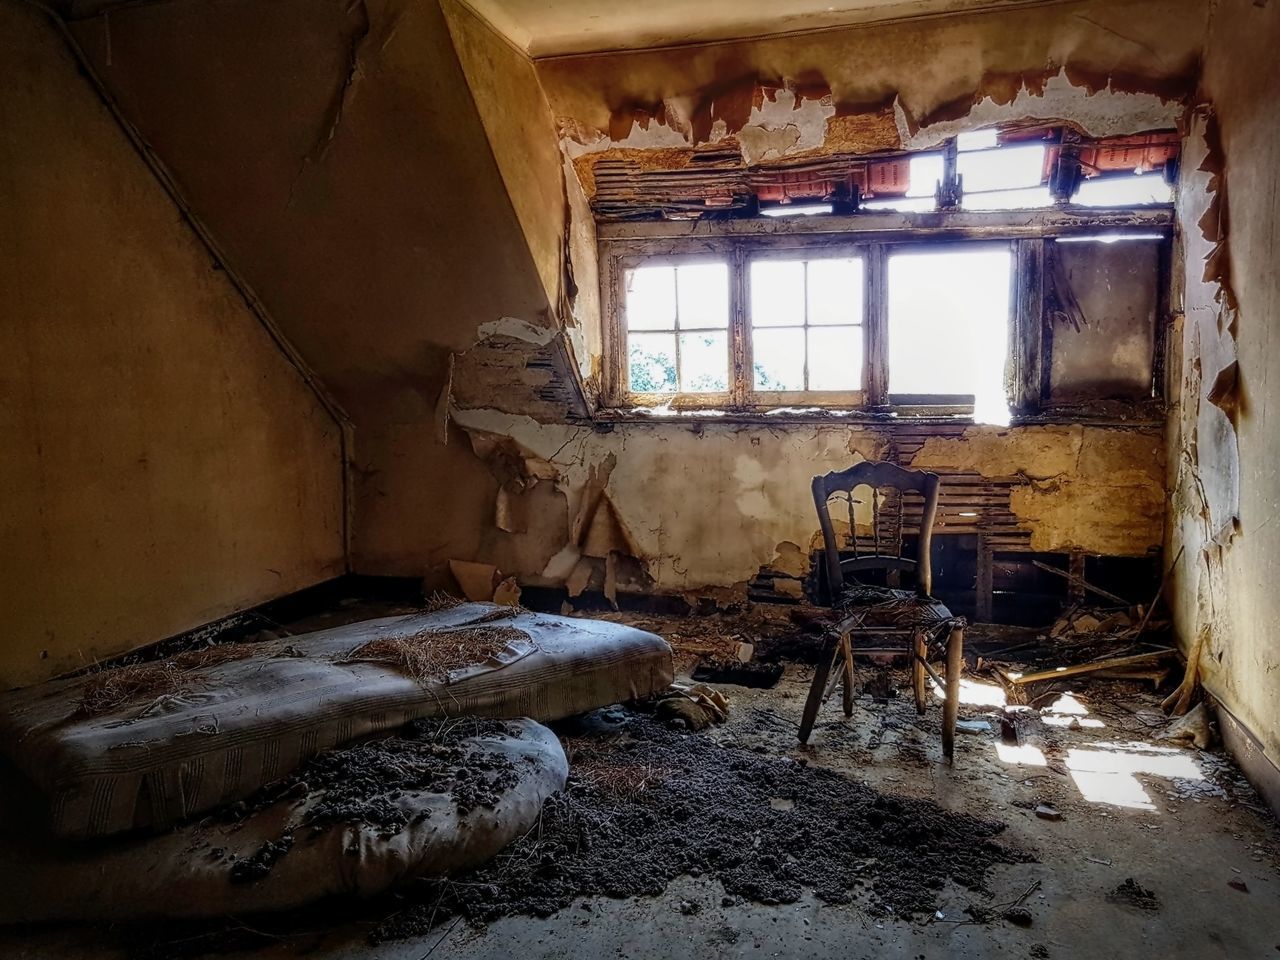 abandoned, indoors, window, obsolete, architecture, run-down, built structure, no people, damaged, building, old, decline, deterioration, house, bad condition, day, destruction, messy, ruined, home interior, dirty, ceiling